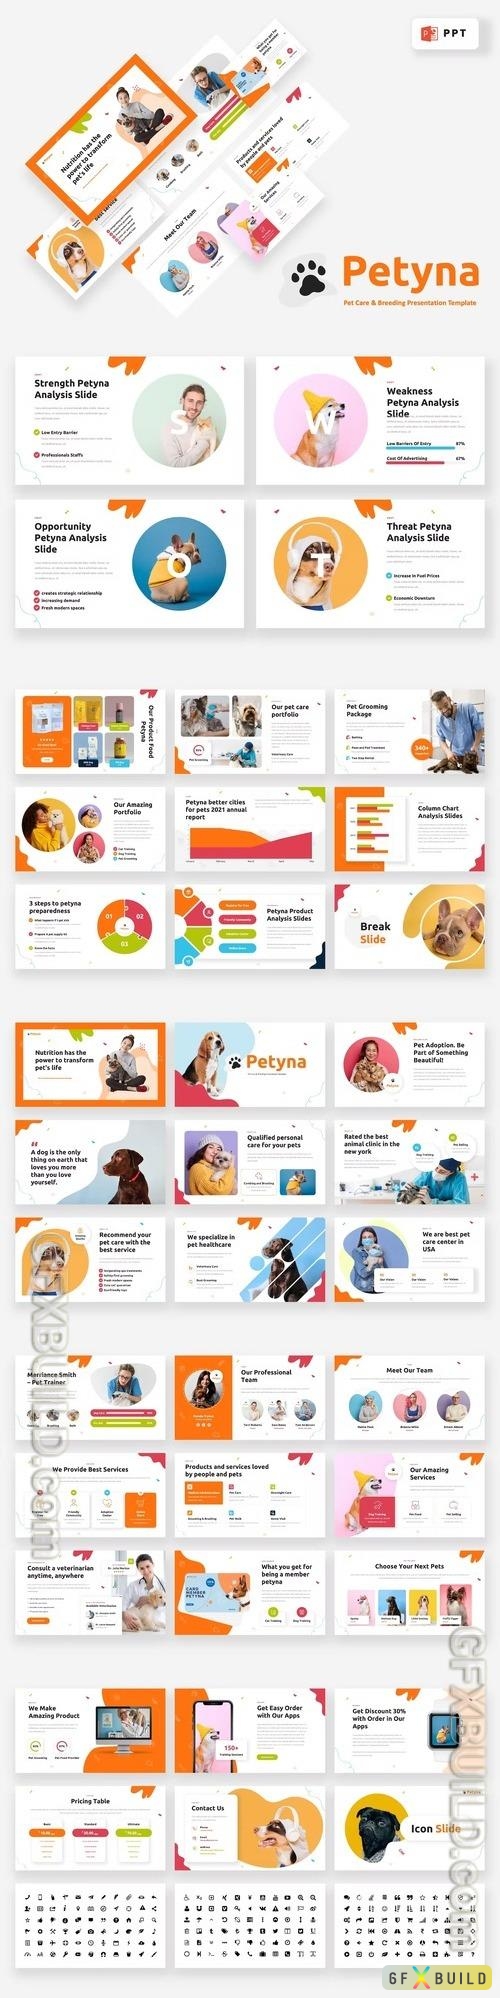 PETYNA - Pet Care & Breeding Powerpoint Template